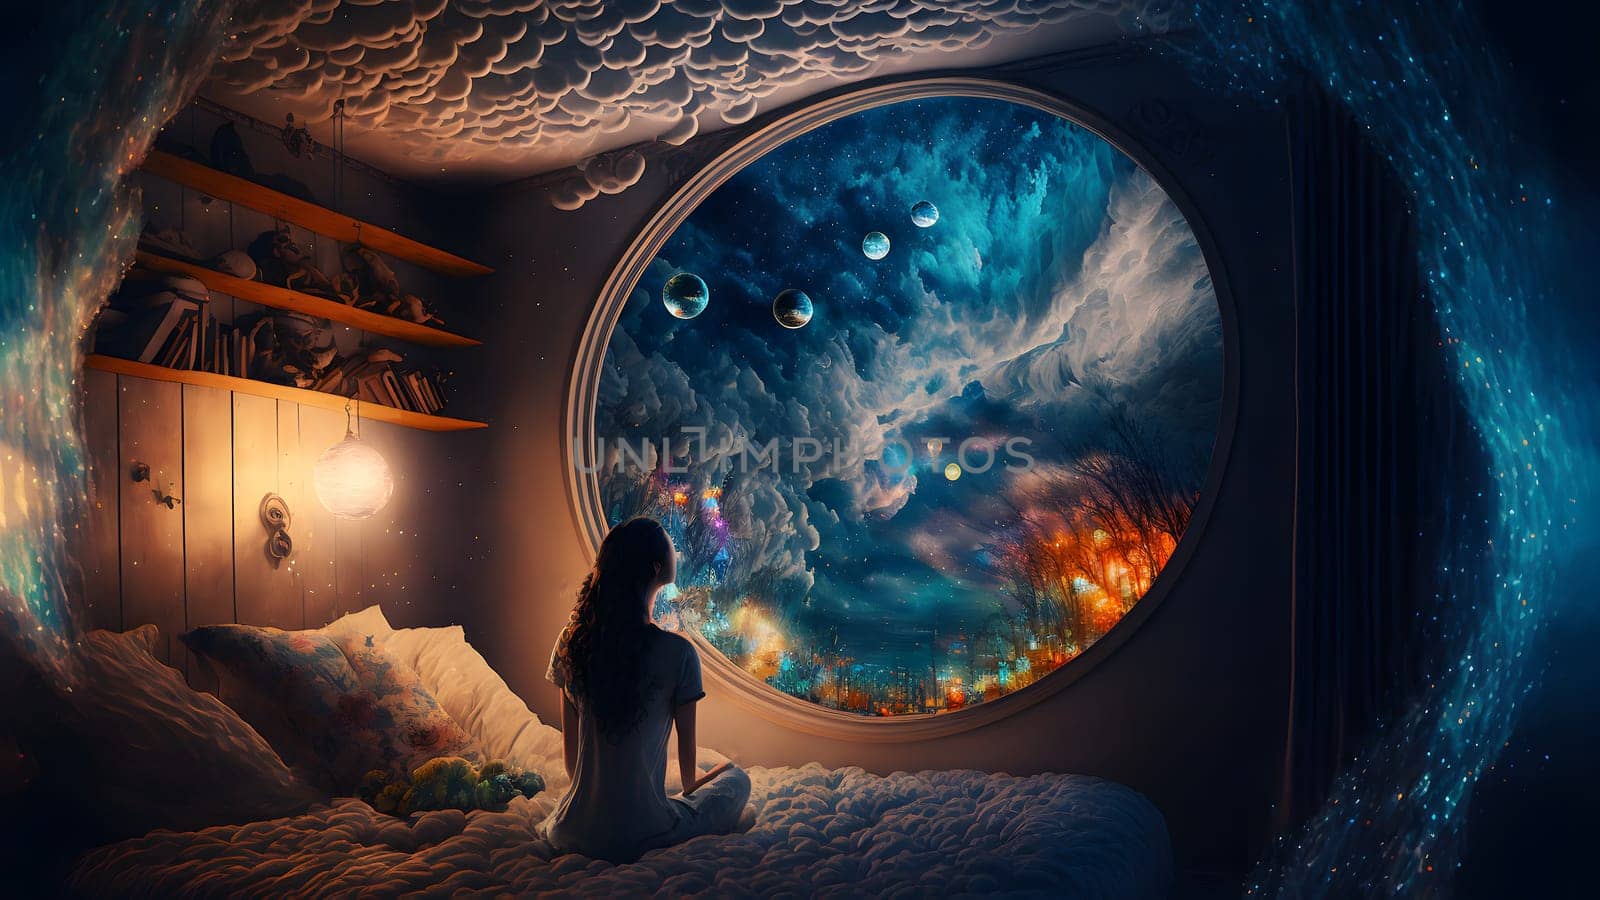 woman sitting on her bed at night and looking into the portal to dream world on the wall, neural network generated art. Digitally generated image. Not based on any actual person, scene or pattern.